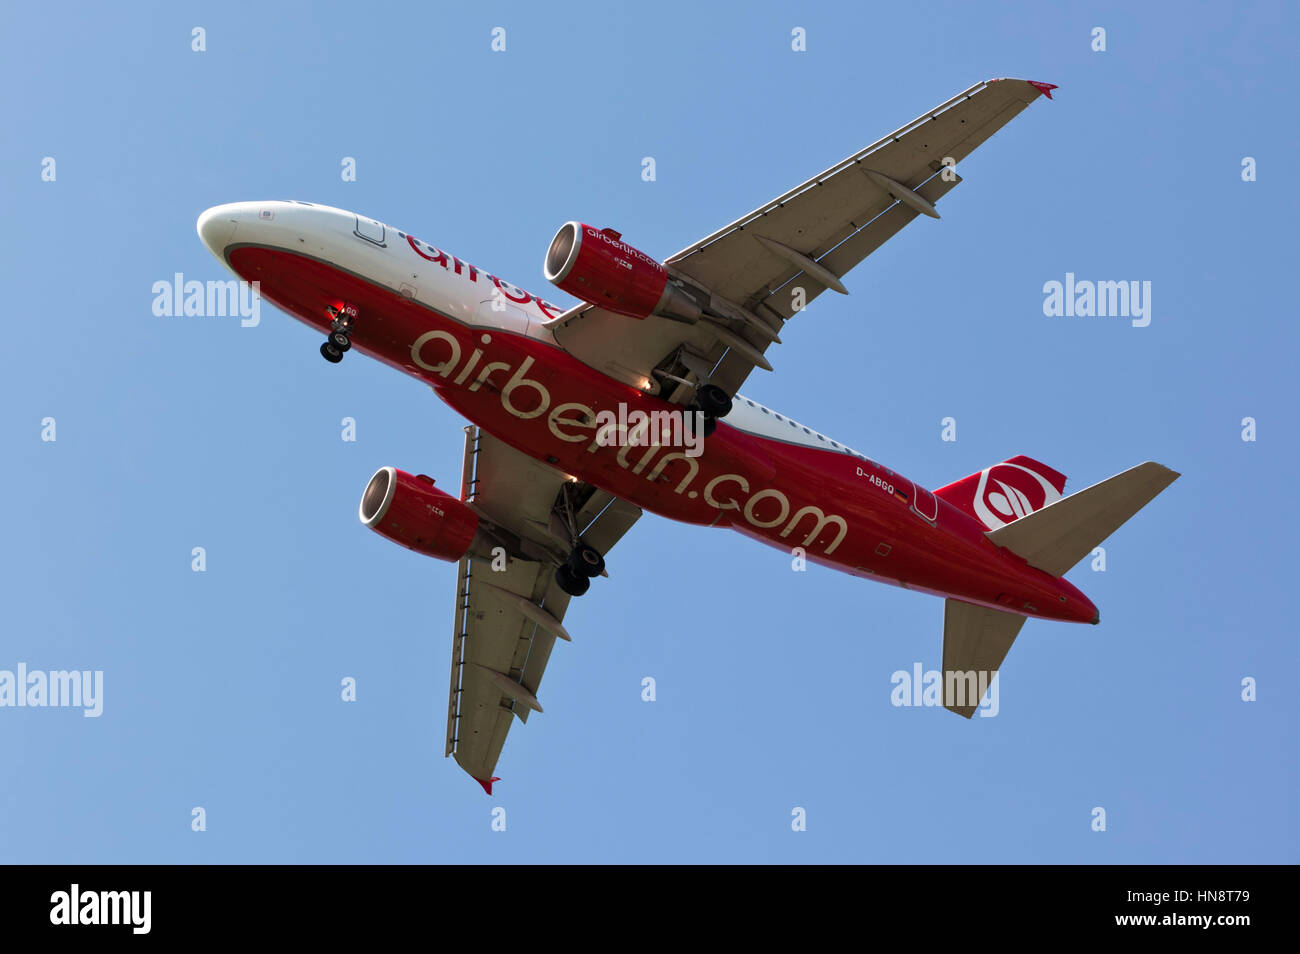 Dusseldorf, Germany -  May 29, 2011: An Air-Berlin jet taking off from DUS airport, blue sky. Stock Photo